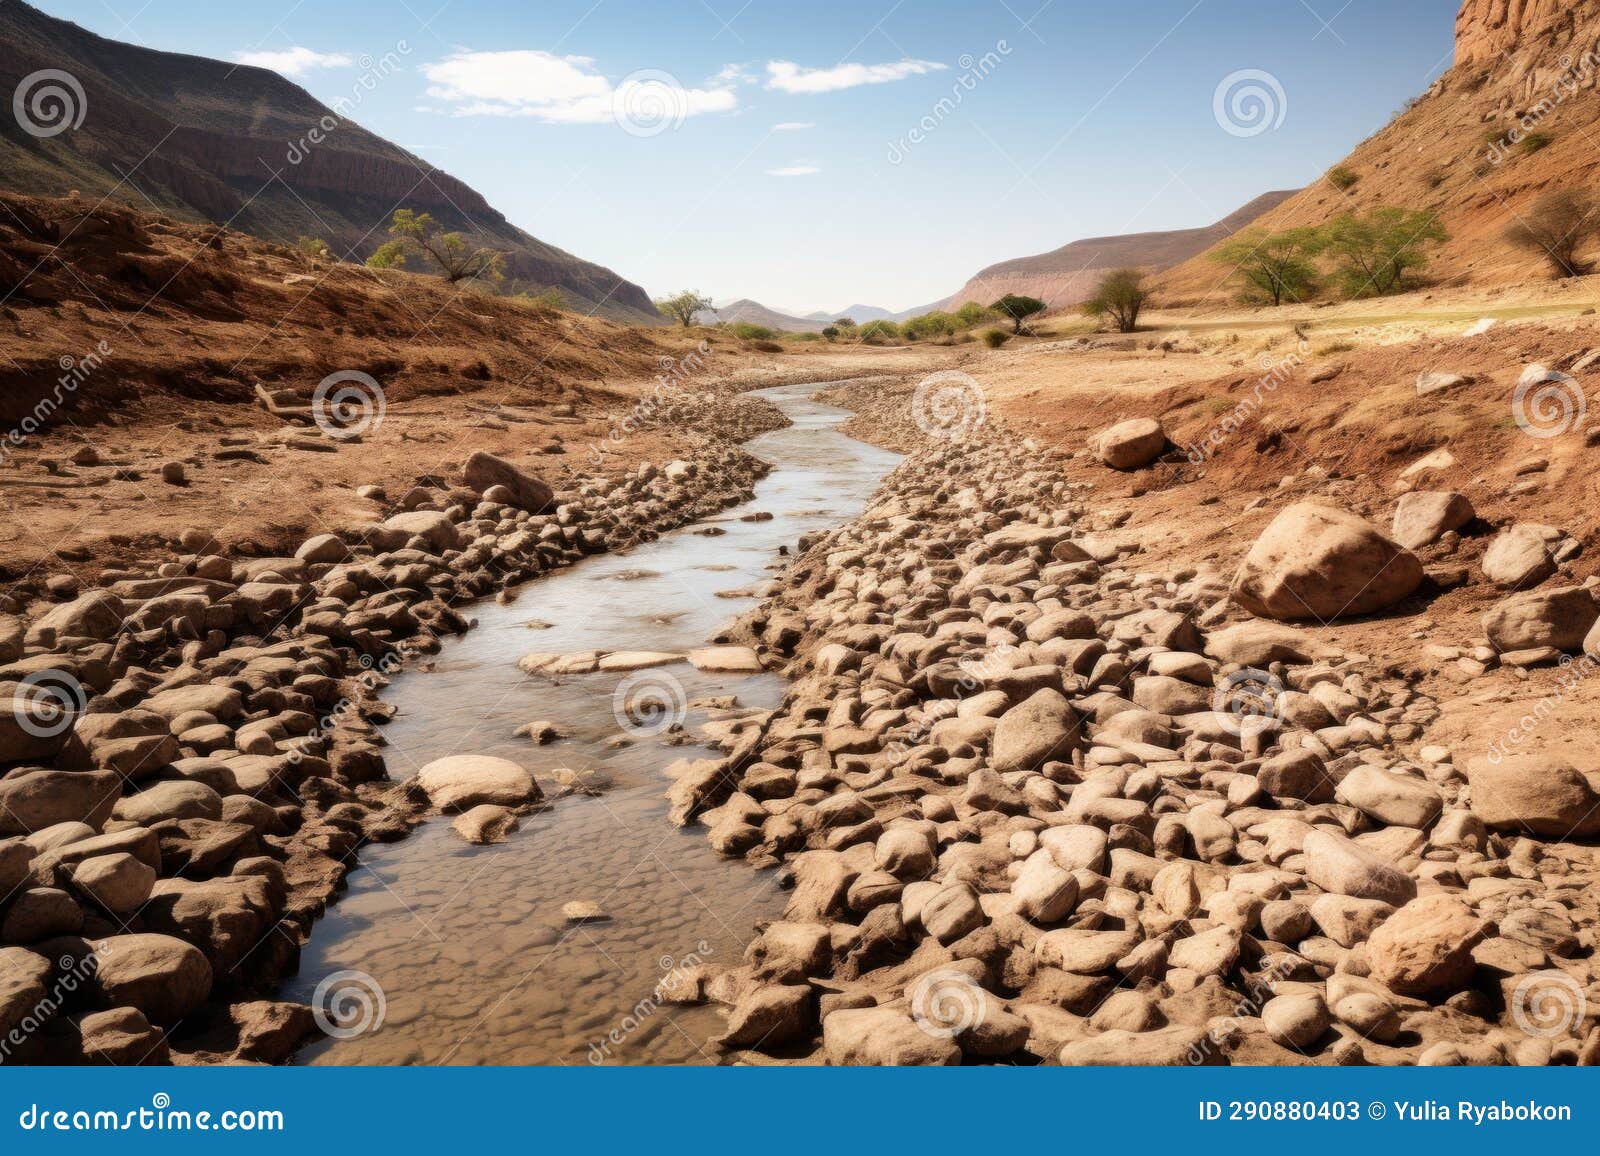 inhospitable dry dirt river climate. generate ai